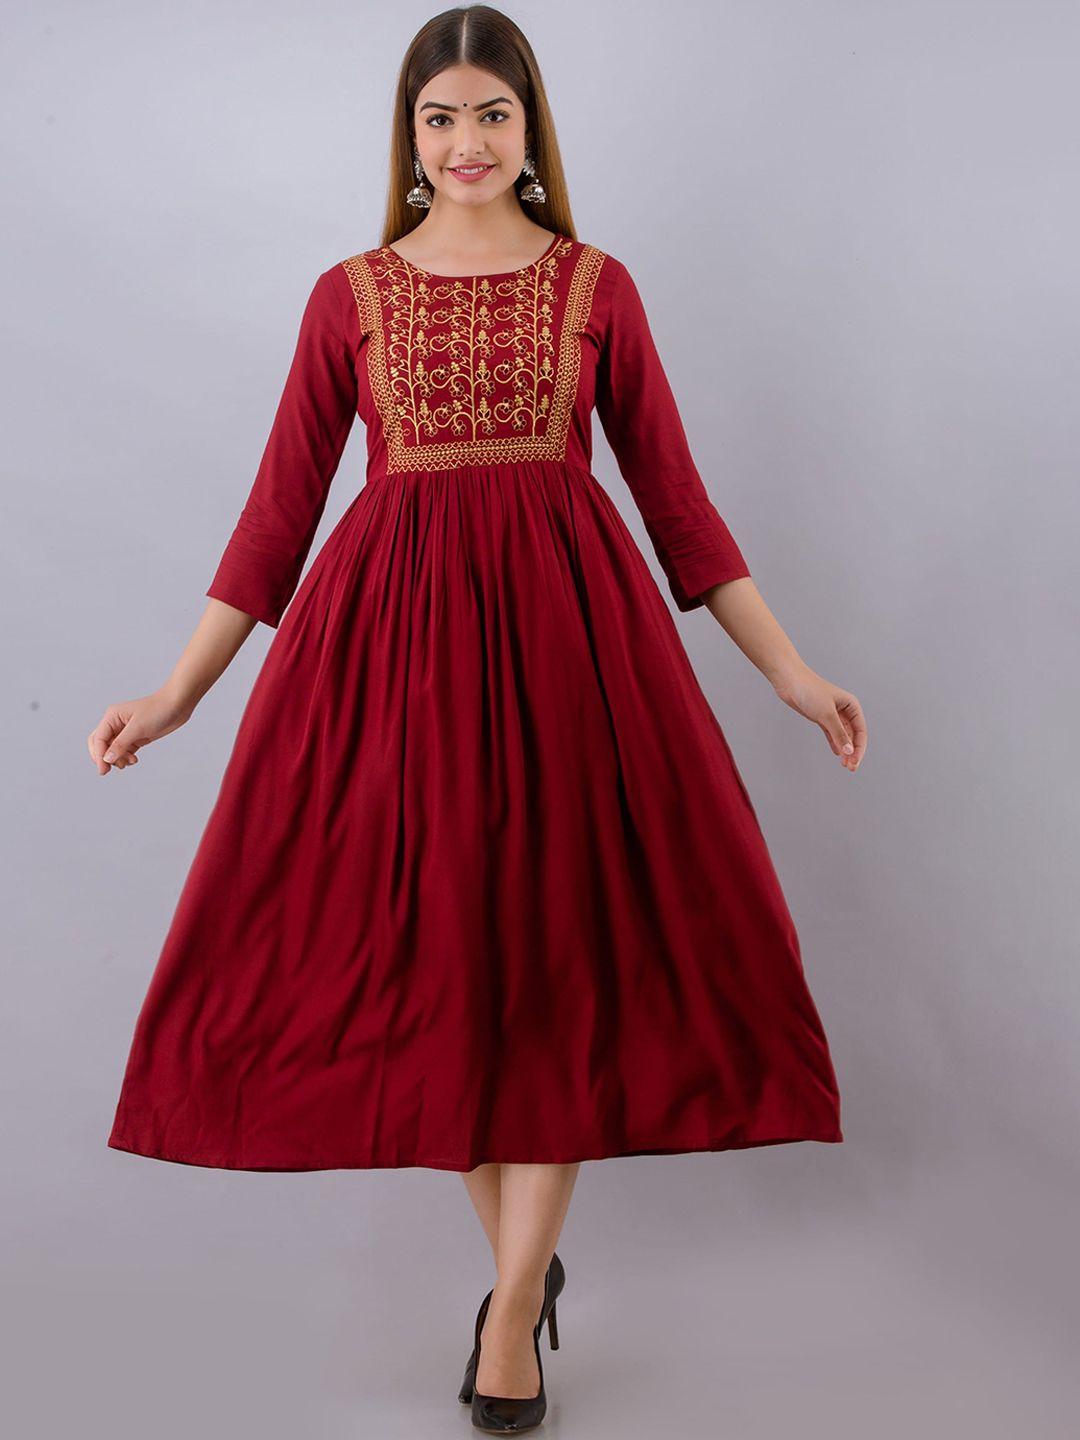 women-touch-maroon-ethnic-motifs-embroidered-ethnic-midi-fit-&-flare-dress